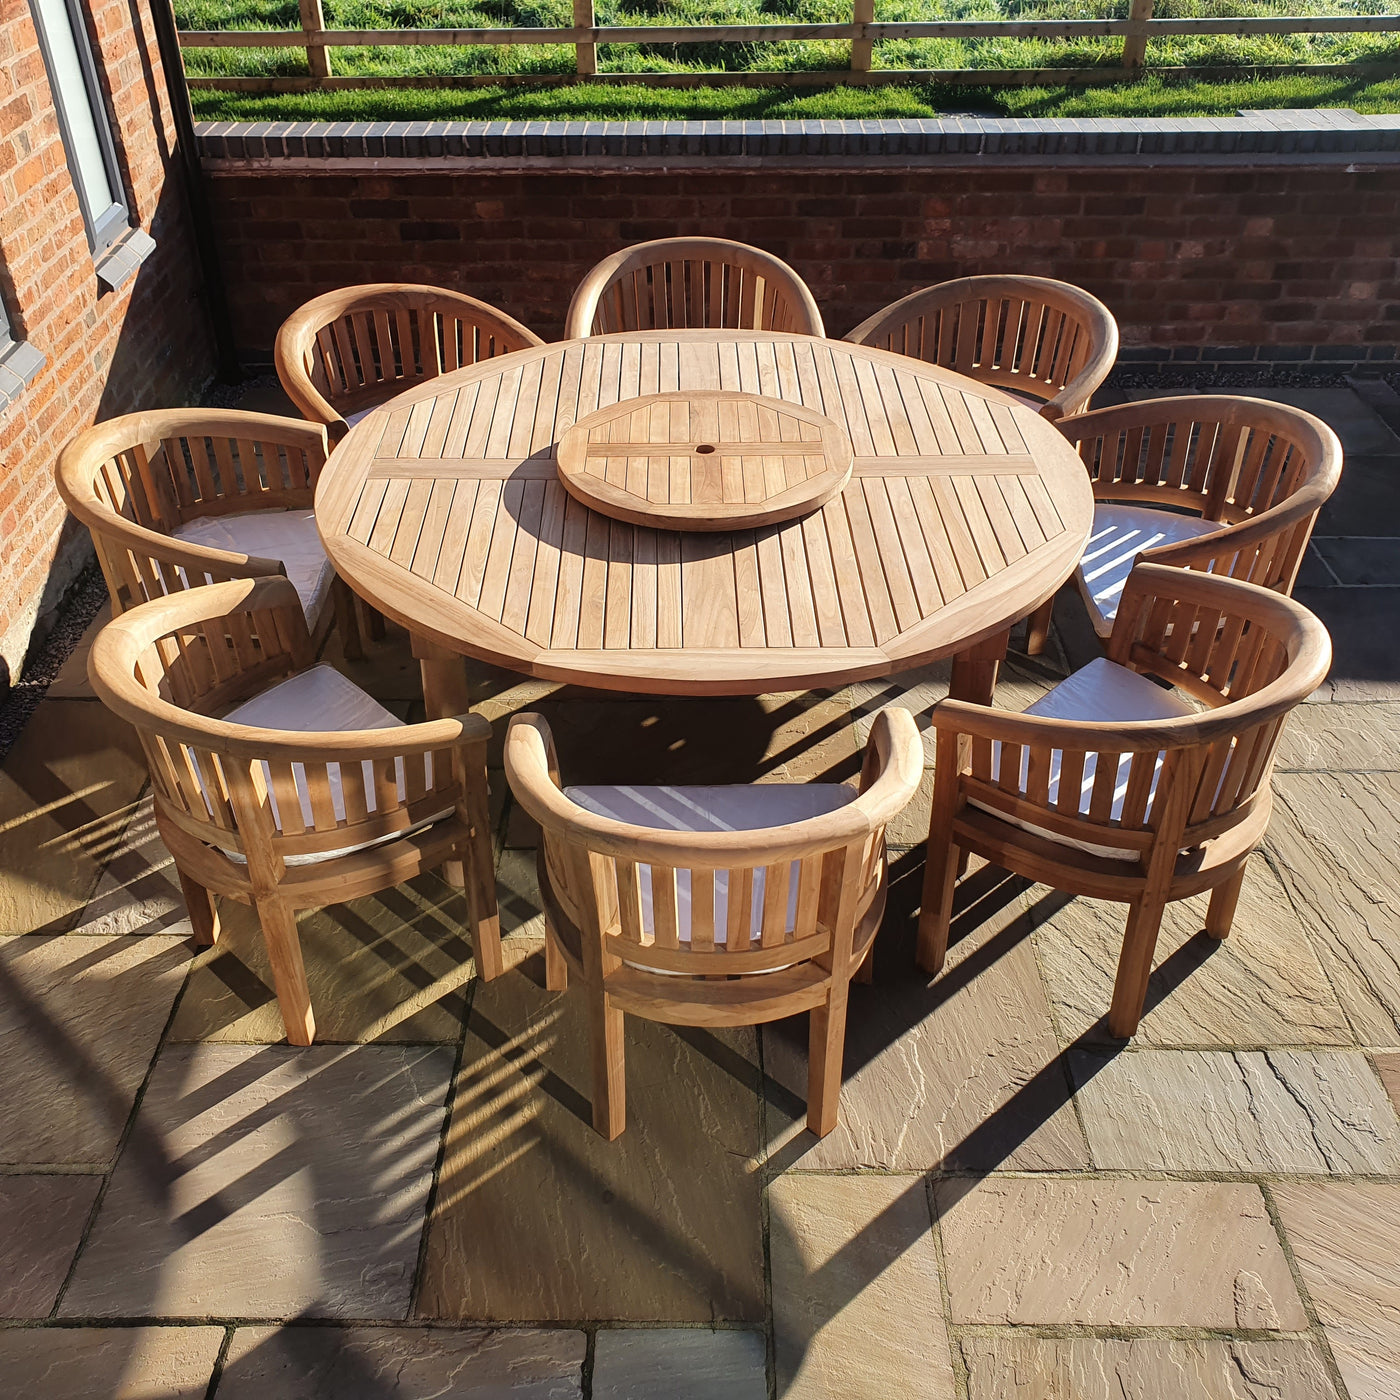 Round Teak 180cm Maximus Patio Dining Table Set (8 San Francisco Chairs) Complete set Cushions included, set on a stone terrace under sunlight, surrounded by a brick wall.